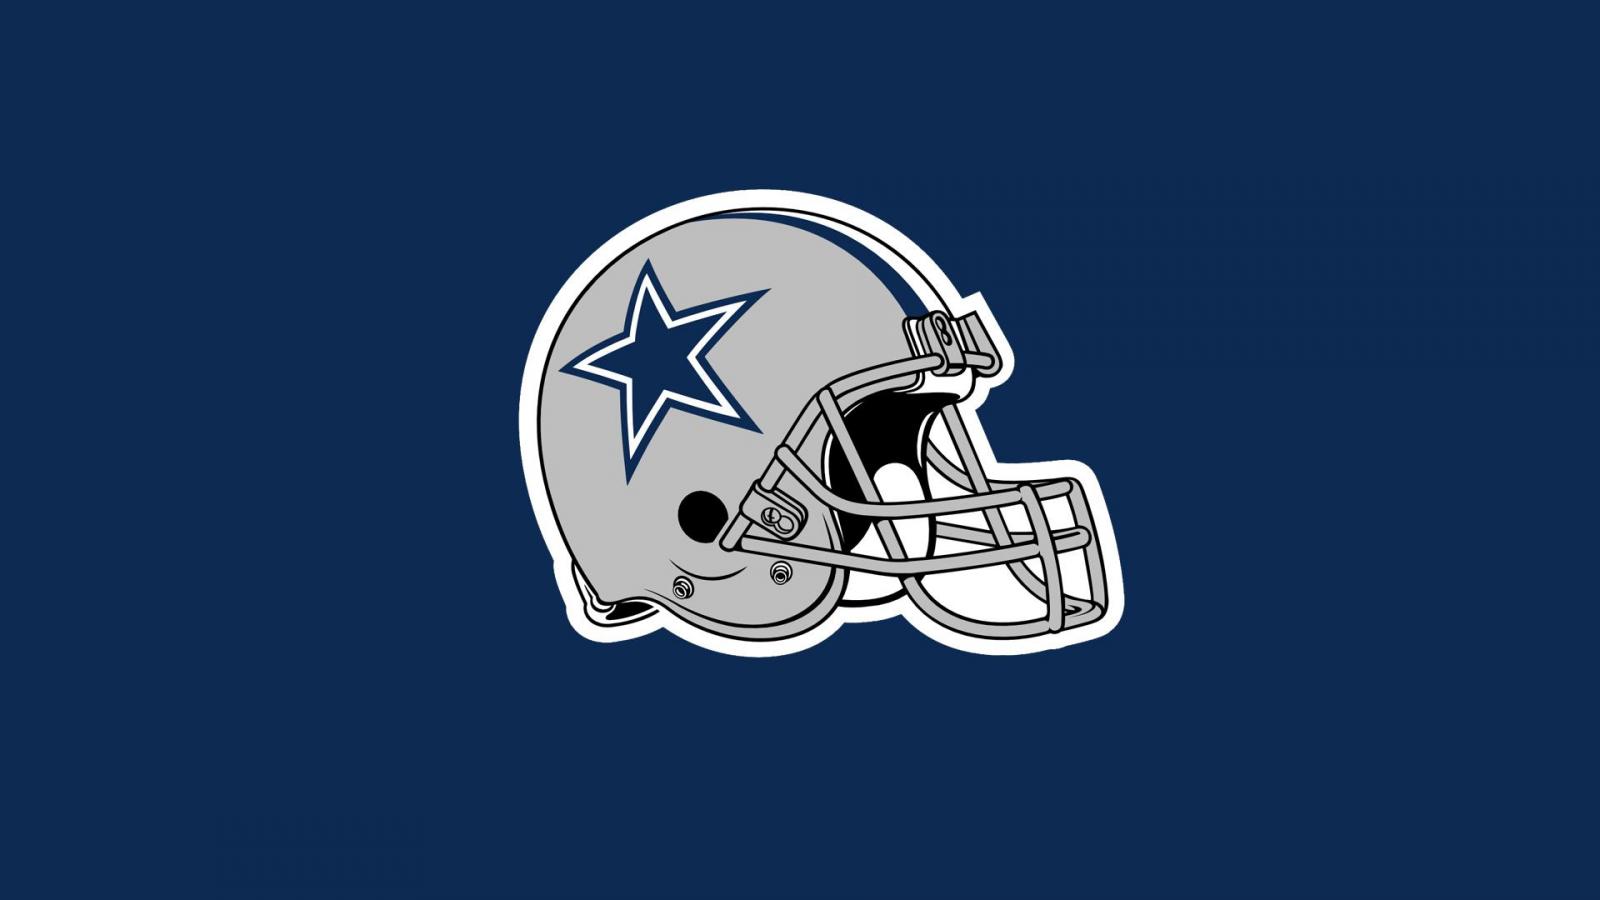 Dallas Cowboys High Quality And Resolution Wallpaper